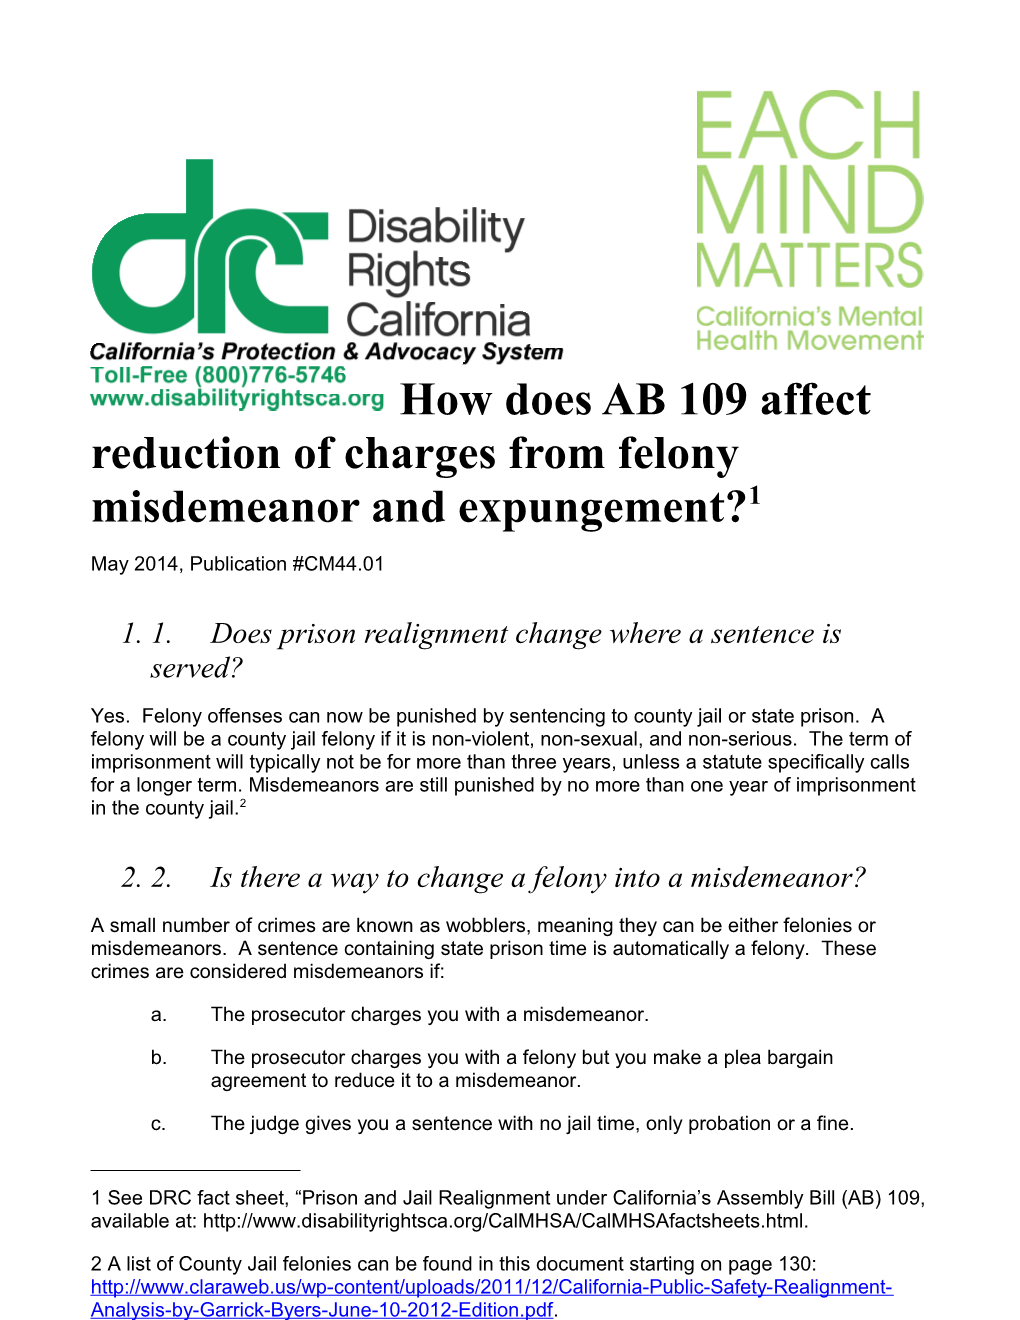 How Does AB 109 Affect Reduction of Charges from Felony Misdemeanor and Expungement?